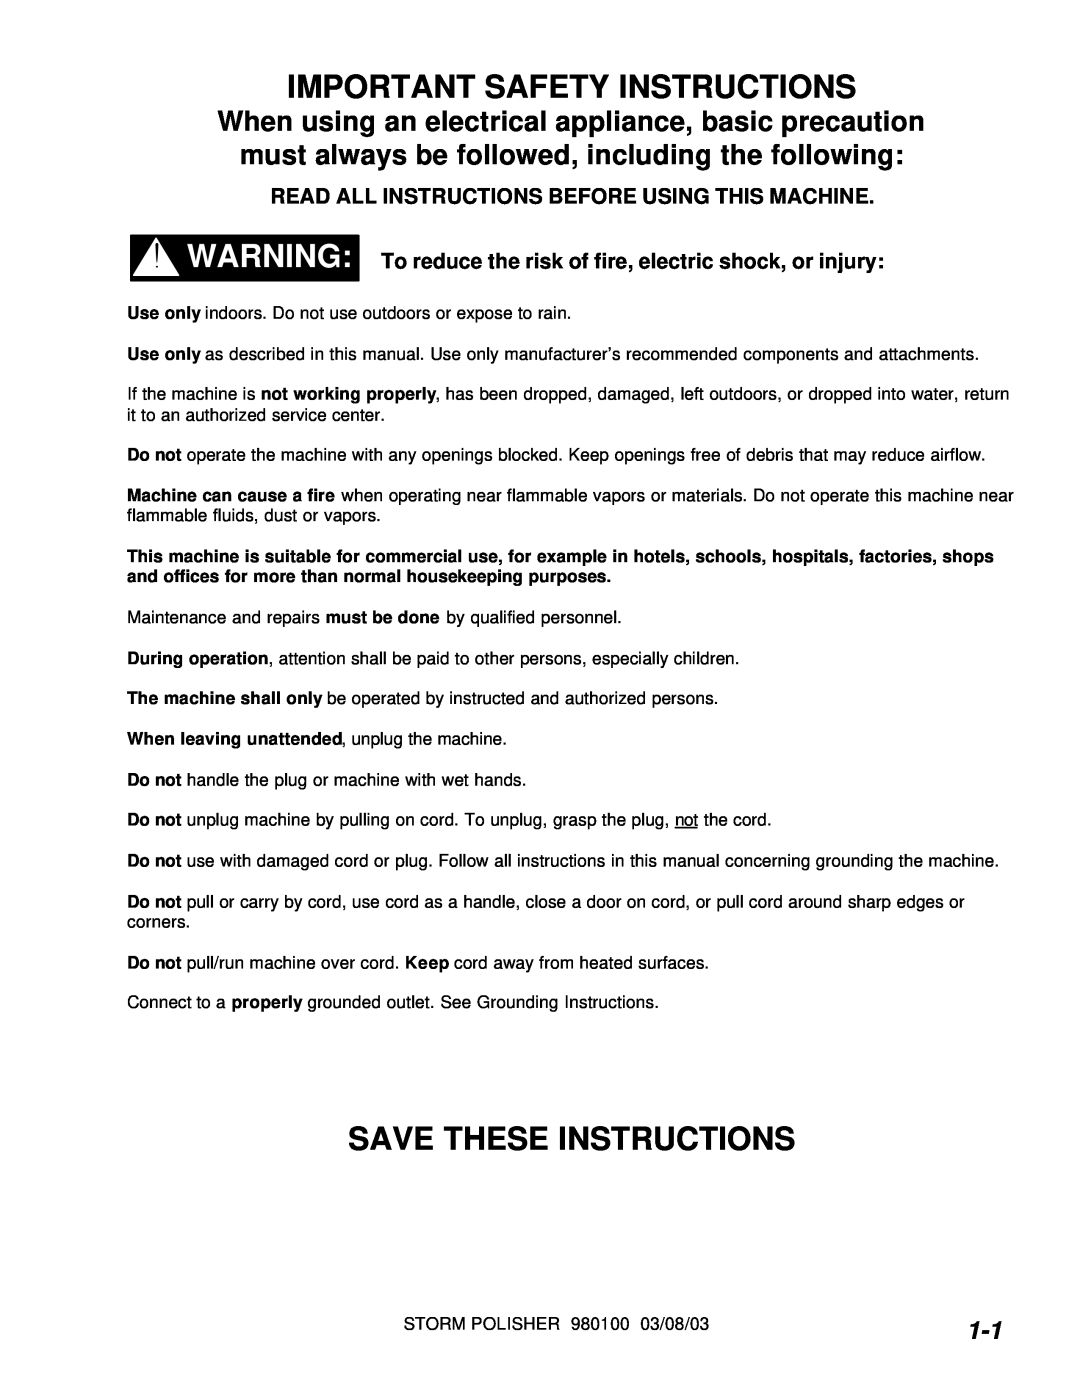 Windsor SP20X Important Safety Instructions, Save These Instructions, Read All Instructions Before Using This Machine 